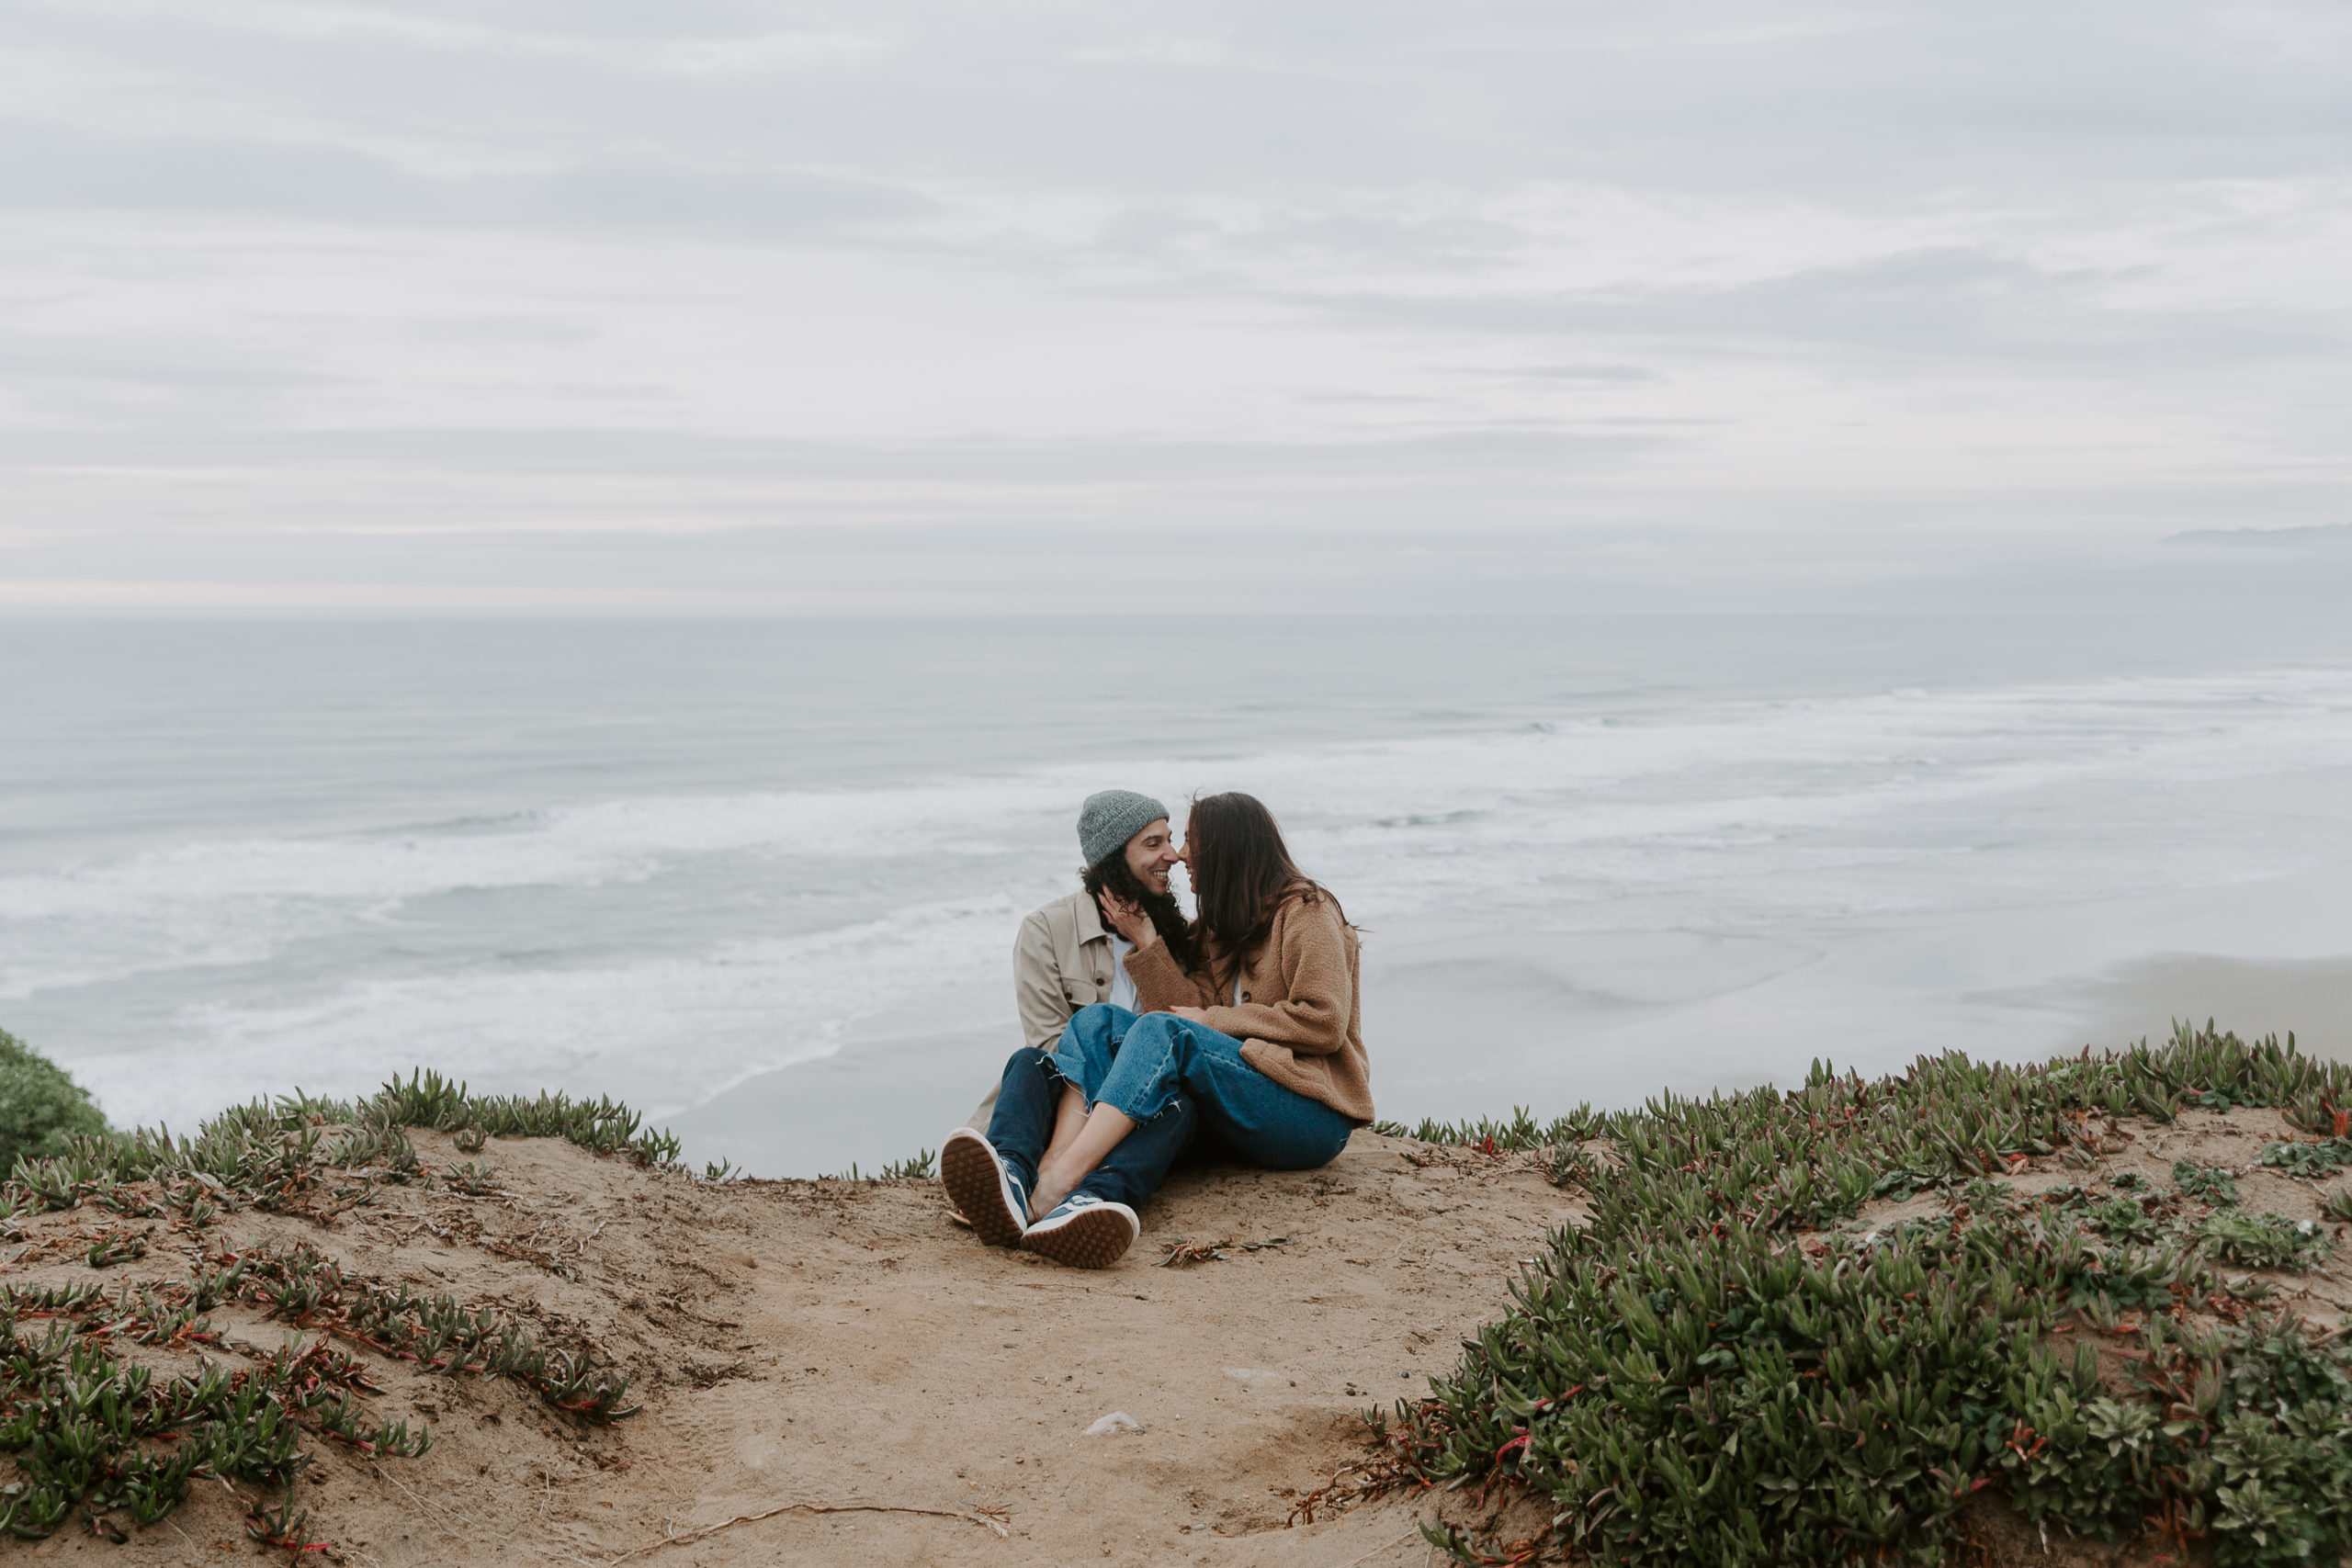 Newly engaged couple sitting on a cliff overlooking the ocean while the woman is holding gently on to her partners cheek during their San Francisco engagement photos